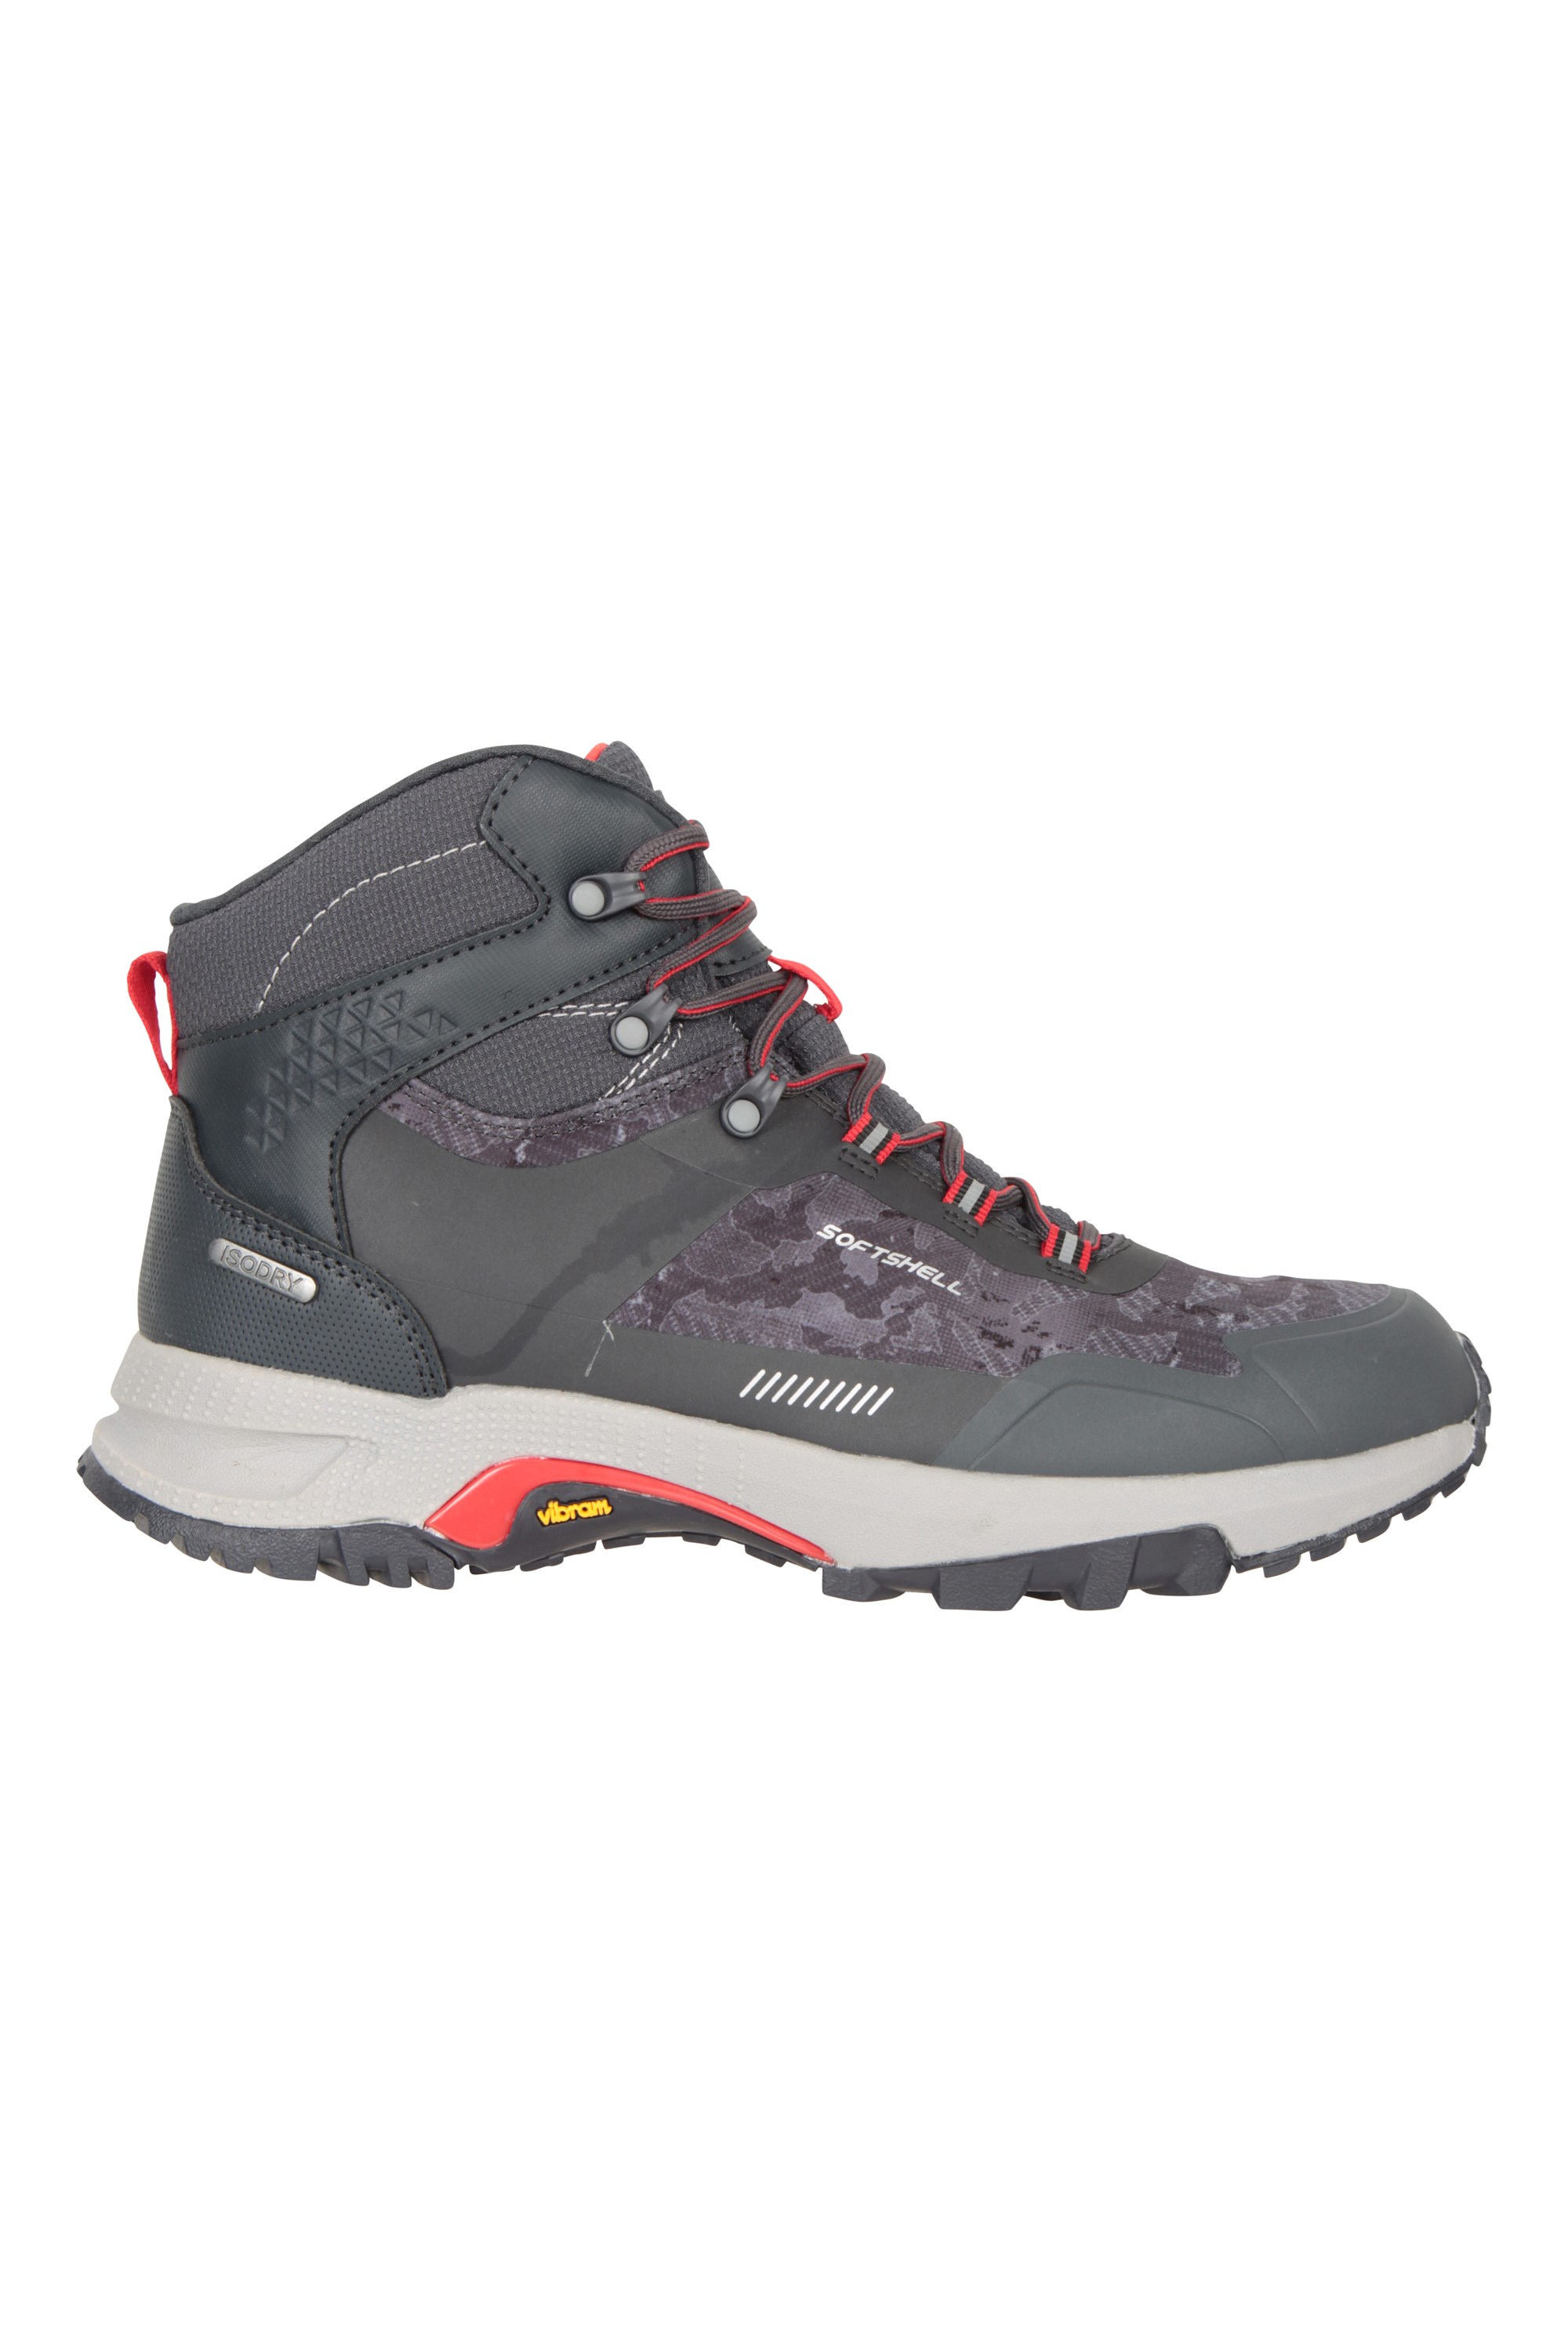 Extreme Spectrum Mens Waterproof Softshell Boots